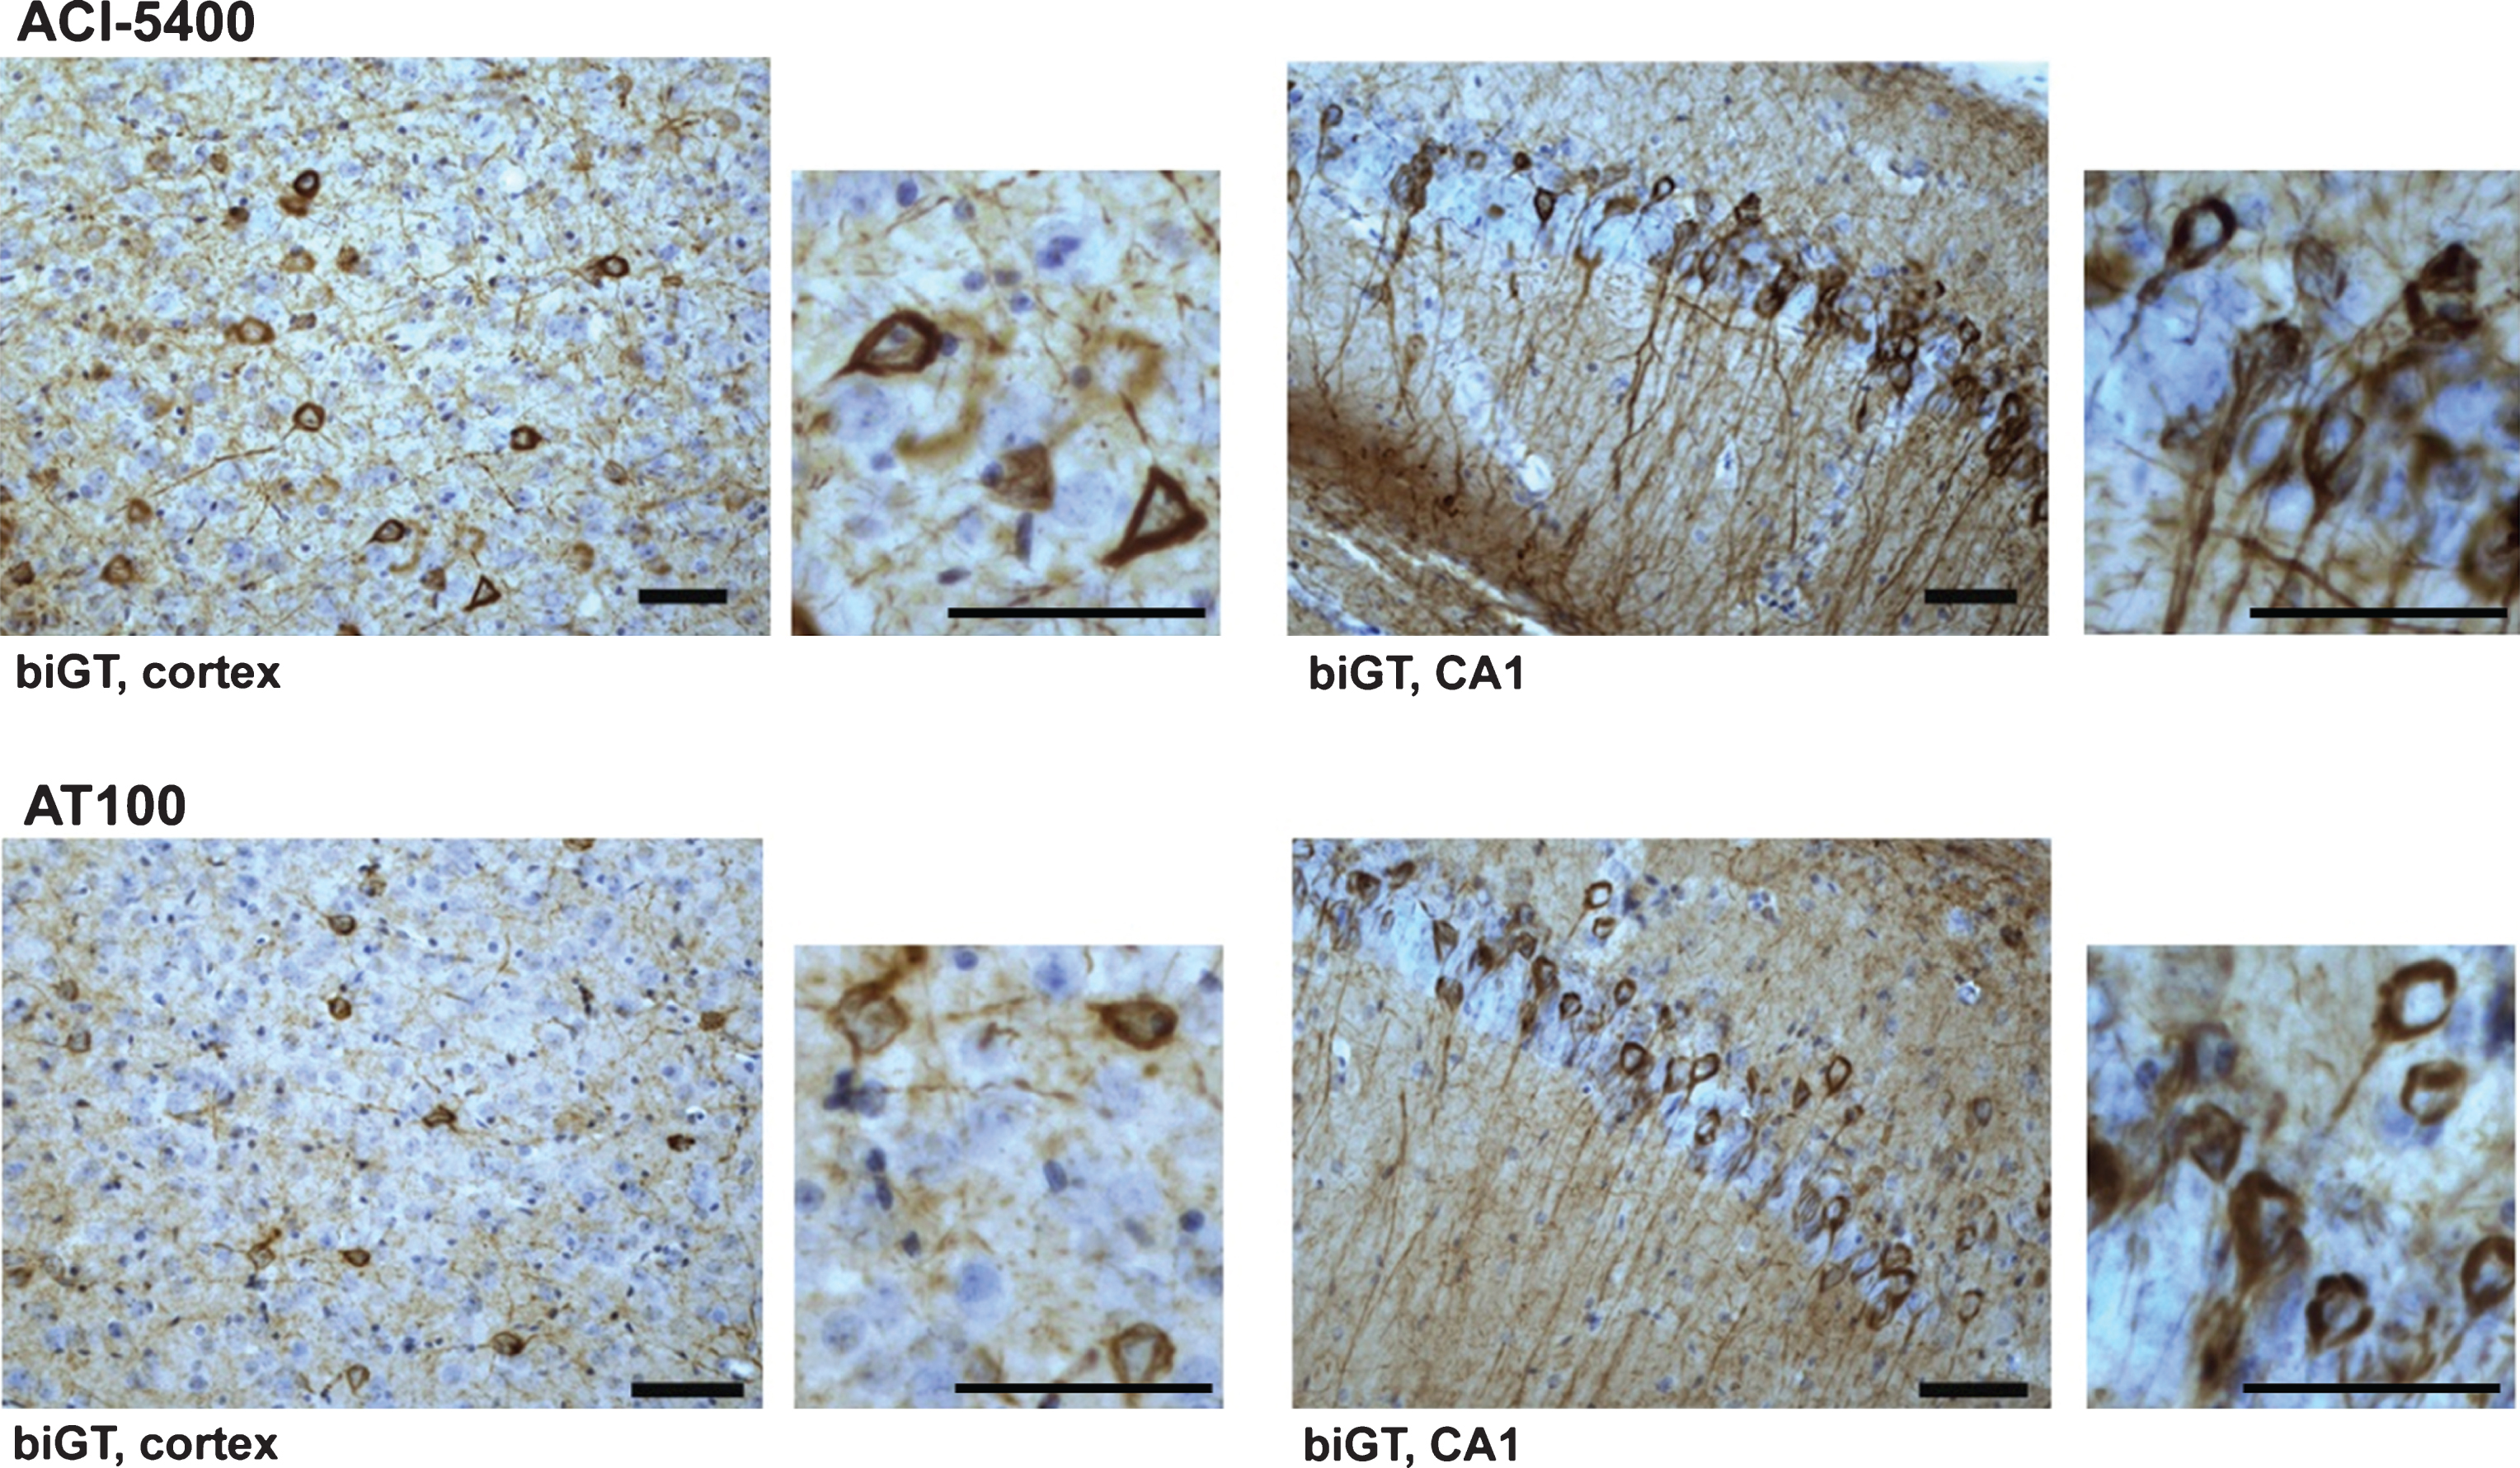 ACI-5400 defines Tau pathology by reaction with tangles and neuropil threads. ACI-5400 specifically revealed neurofibrillary tangles and neuropil threads in the cortex and CA1 hippocampus of biGT mice (upper panels), with AT100 as positive control (lower panels). Enlarged images demonstrated the exquisite nature of the fibrillar tauopathy in the somata of pyramidal neurons in cortex and CA1 of old biGT mice. The following antibody dilutions were used: ACI-5400 at 1/30’000 and AT100 at 1/1’000. Scale bars = 50 μm.